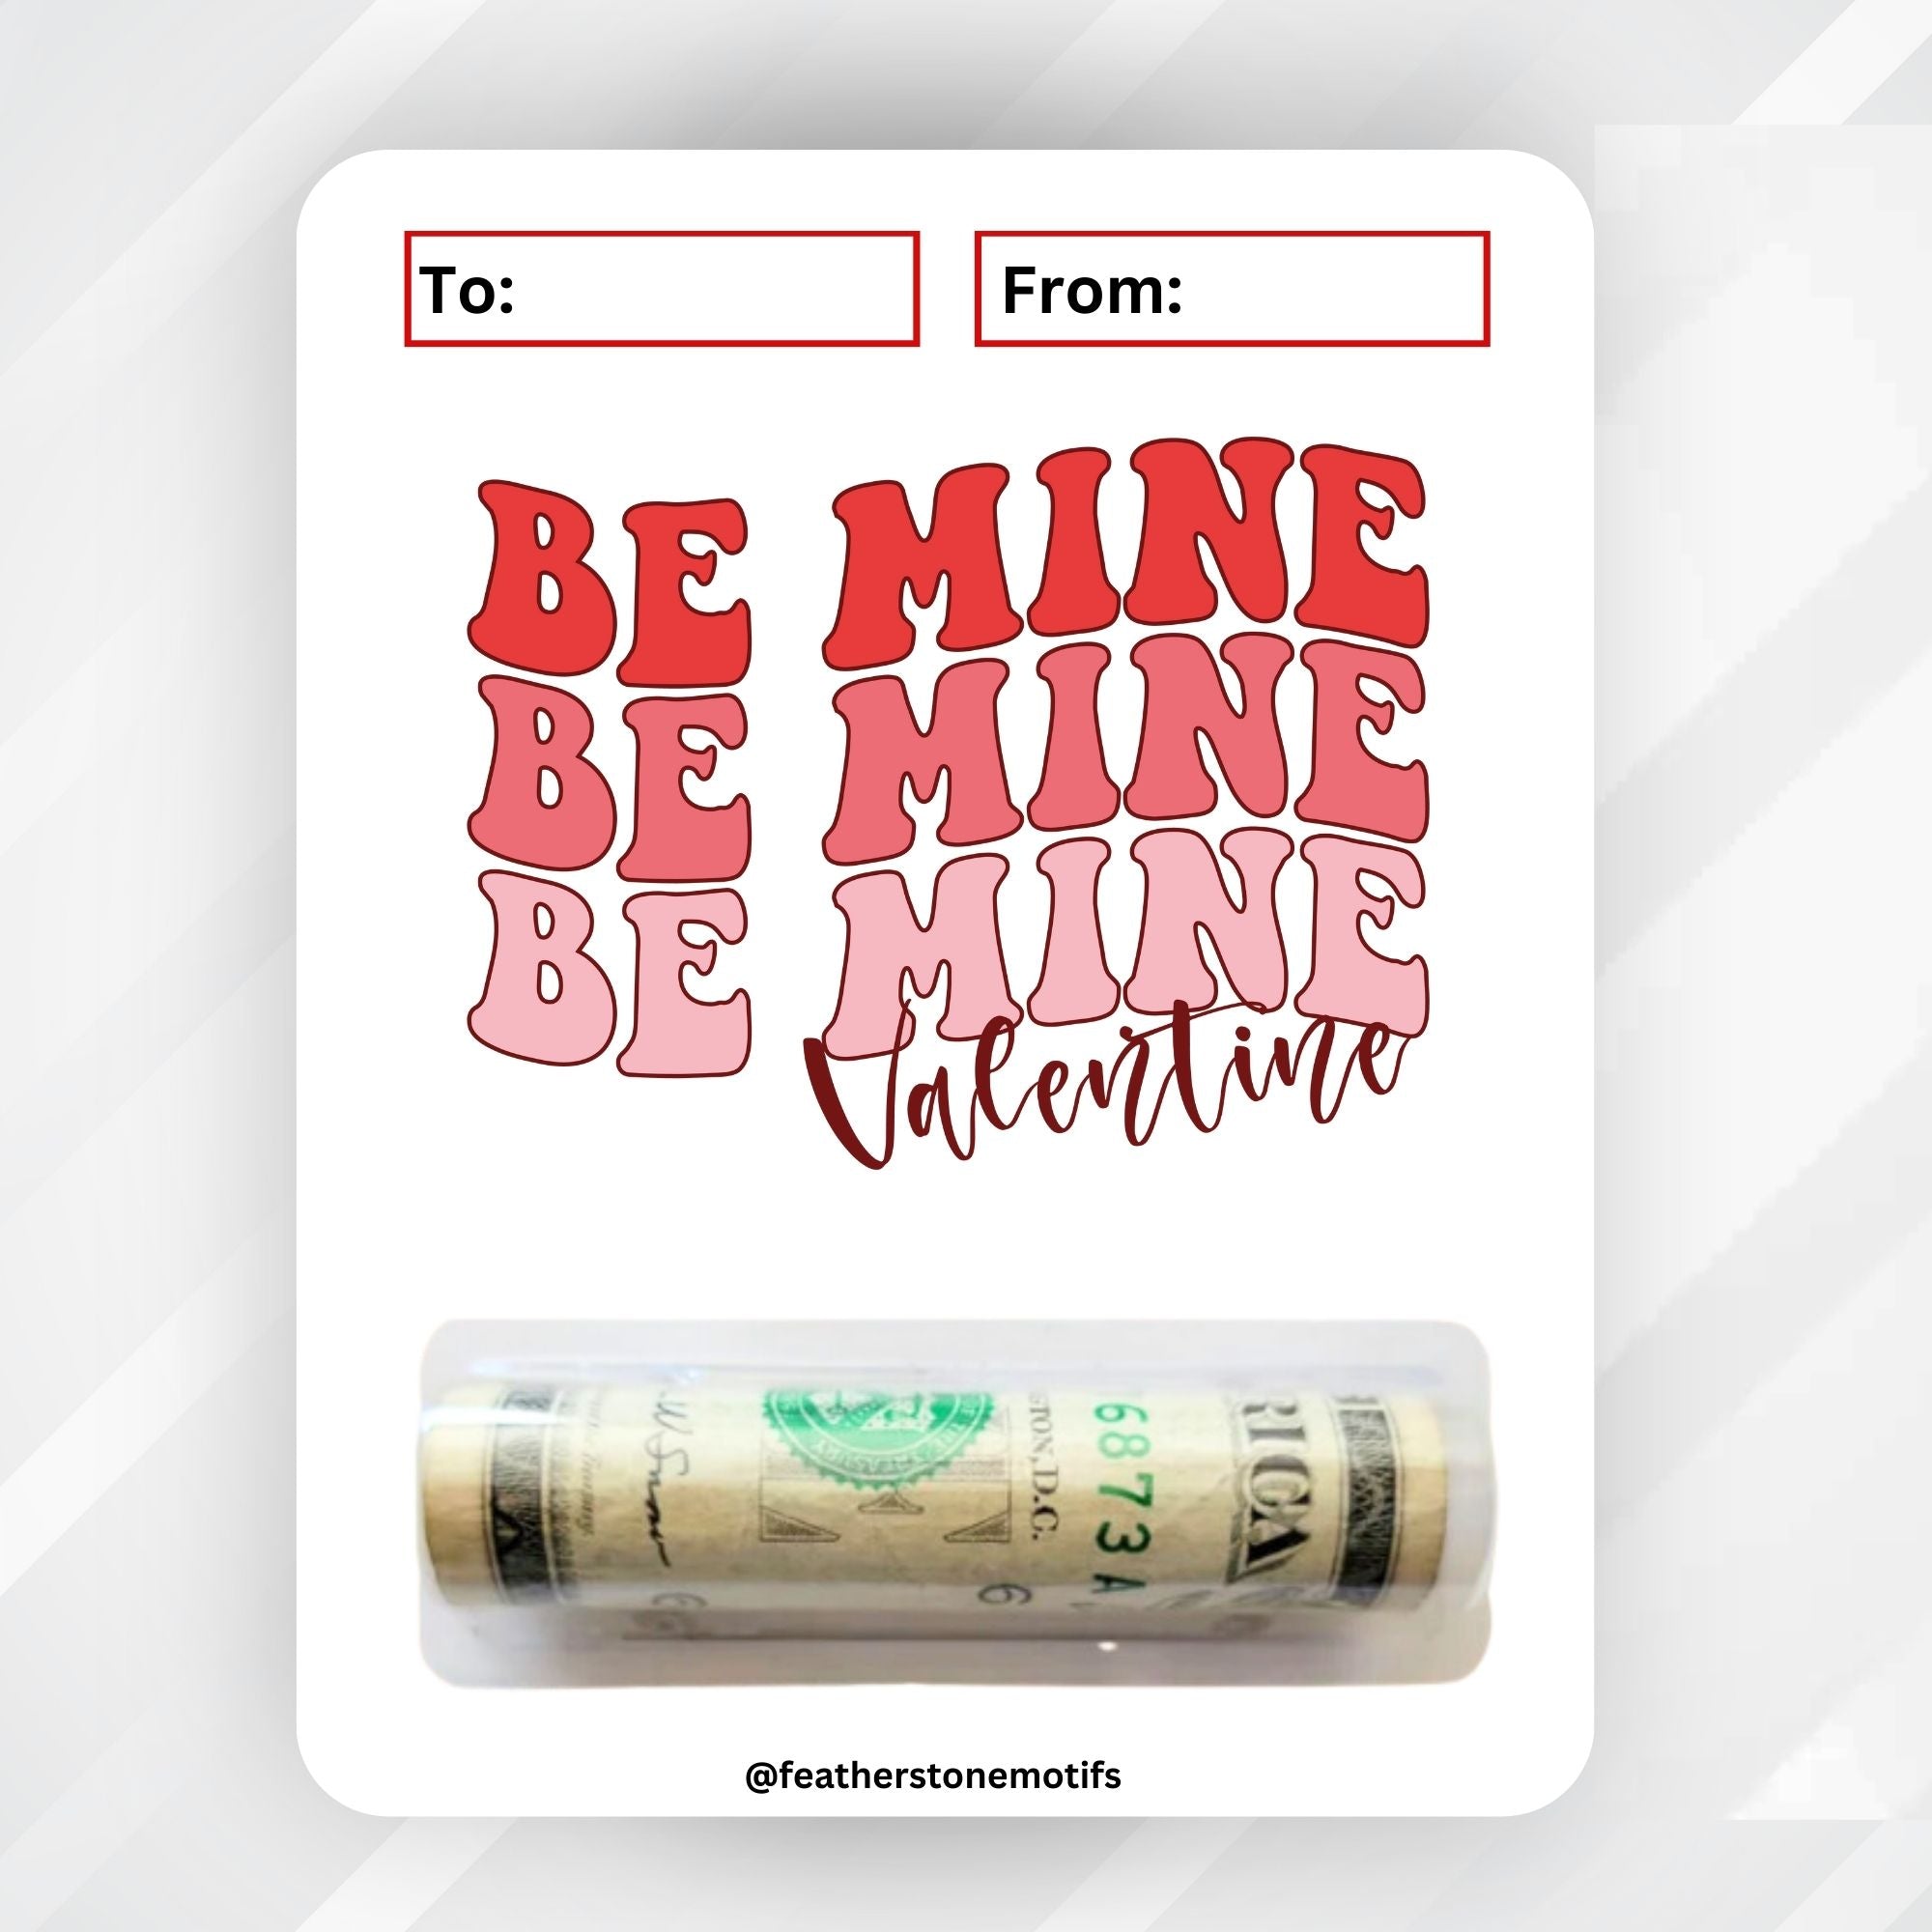 This image shows the money tube attached to the Be Mine Valentine Money Card.